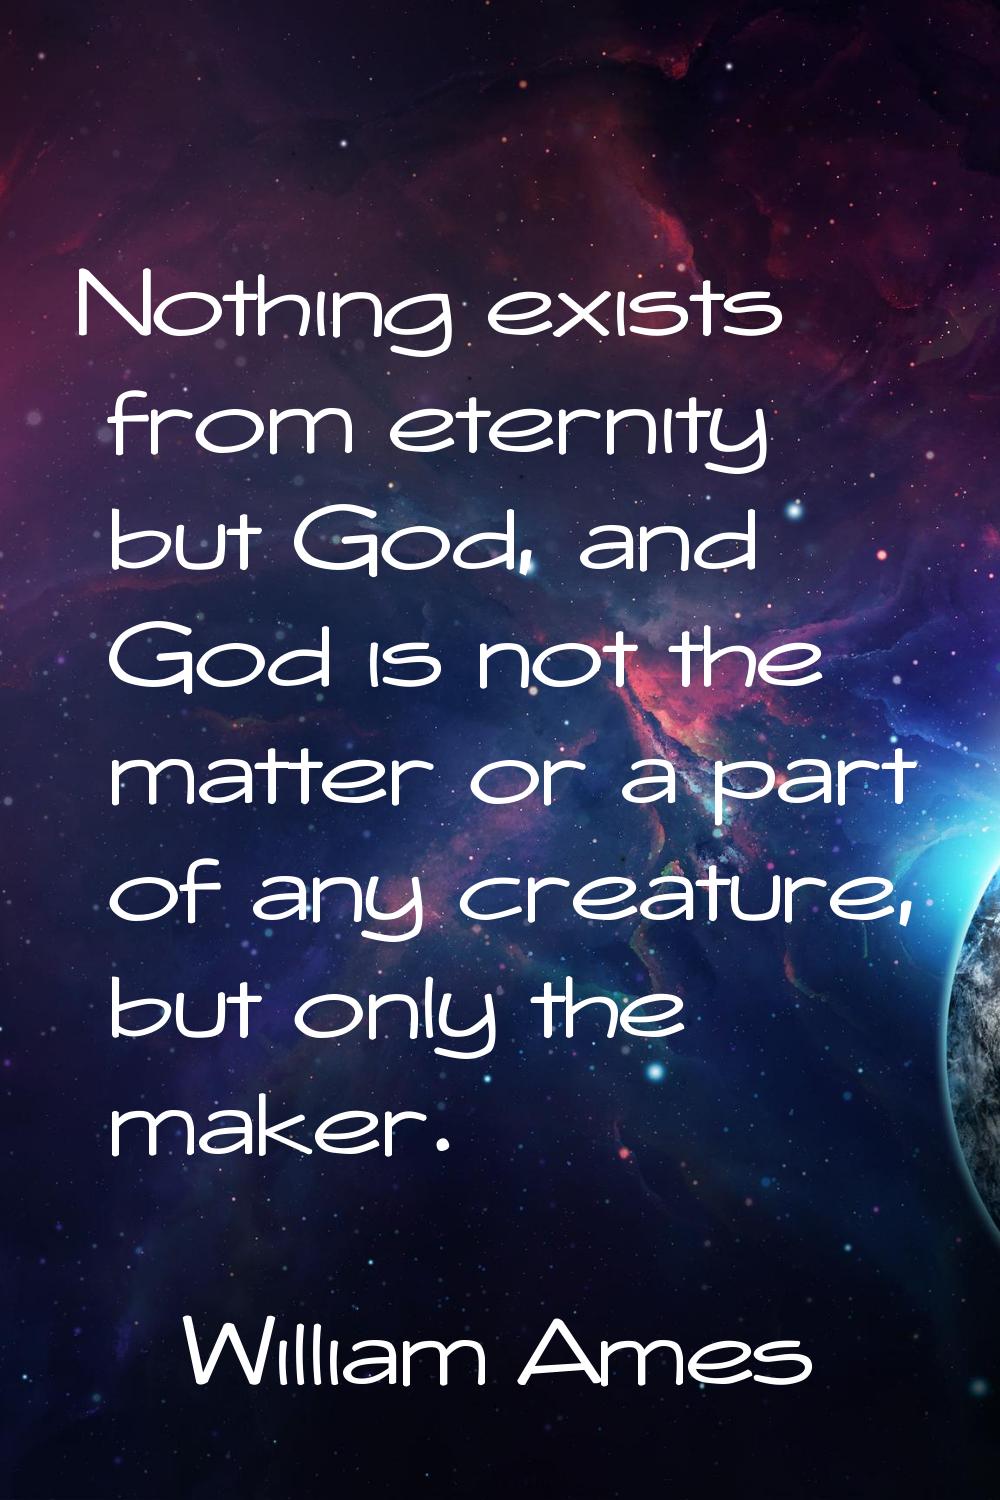 Nothing exists from eternity but God, and God is not the matter or a part of any creature, but only